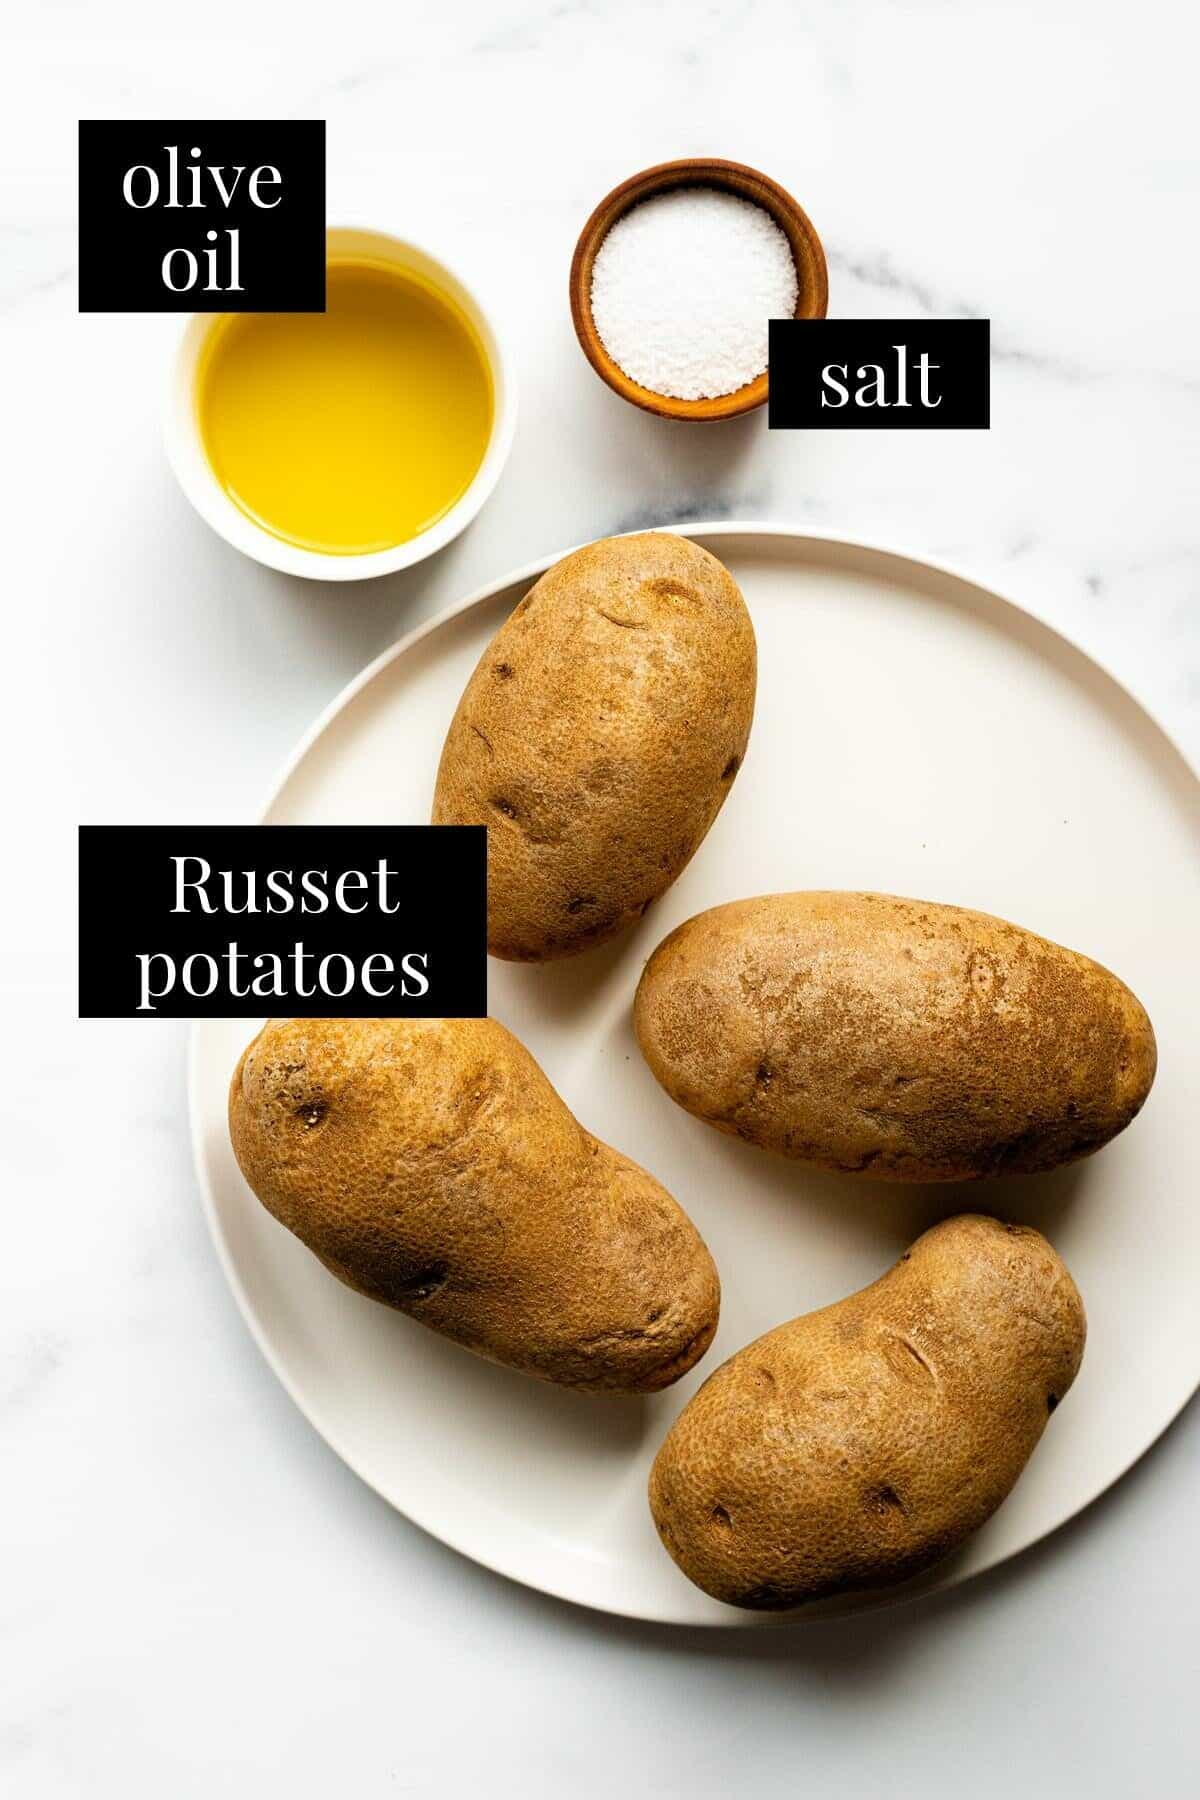 White marble counter top with ingredients to make air fryer baked potatoes